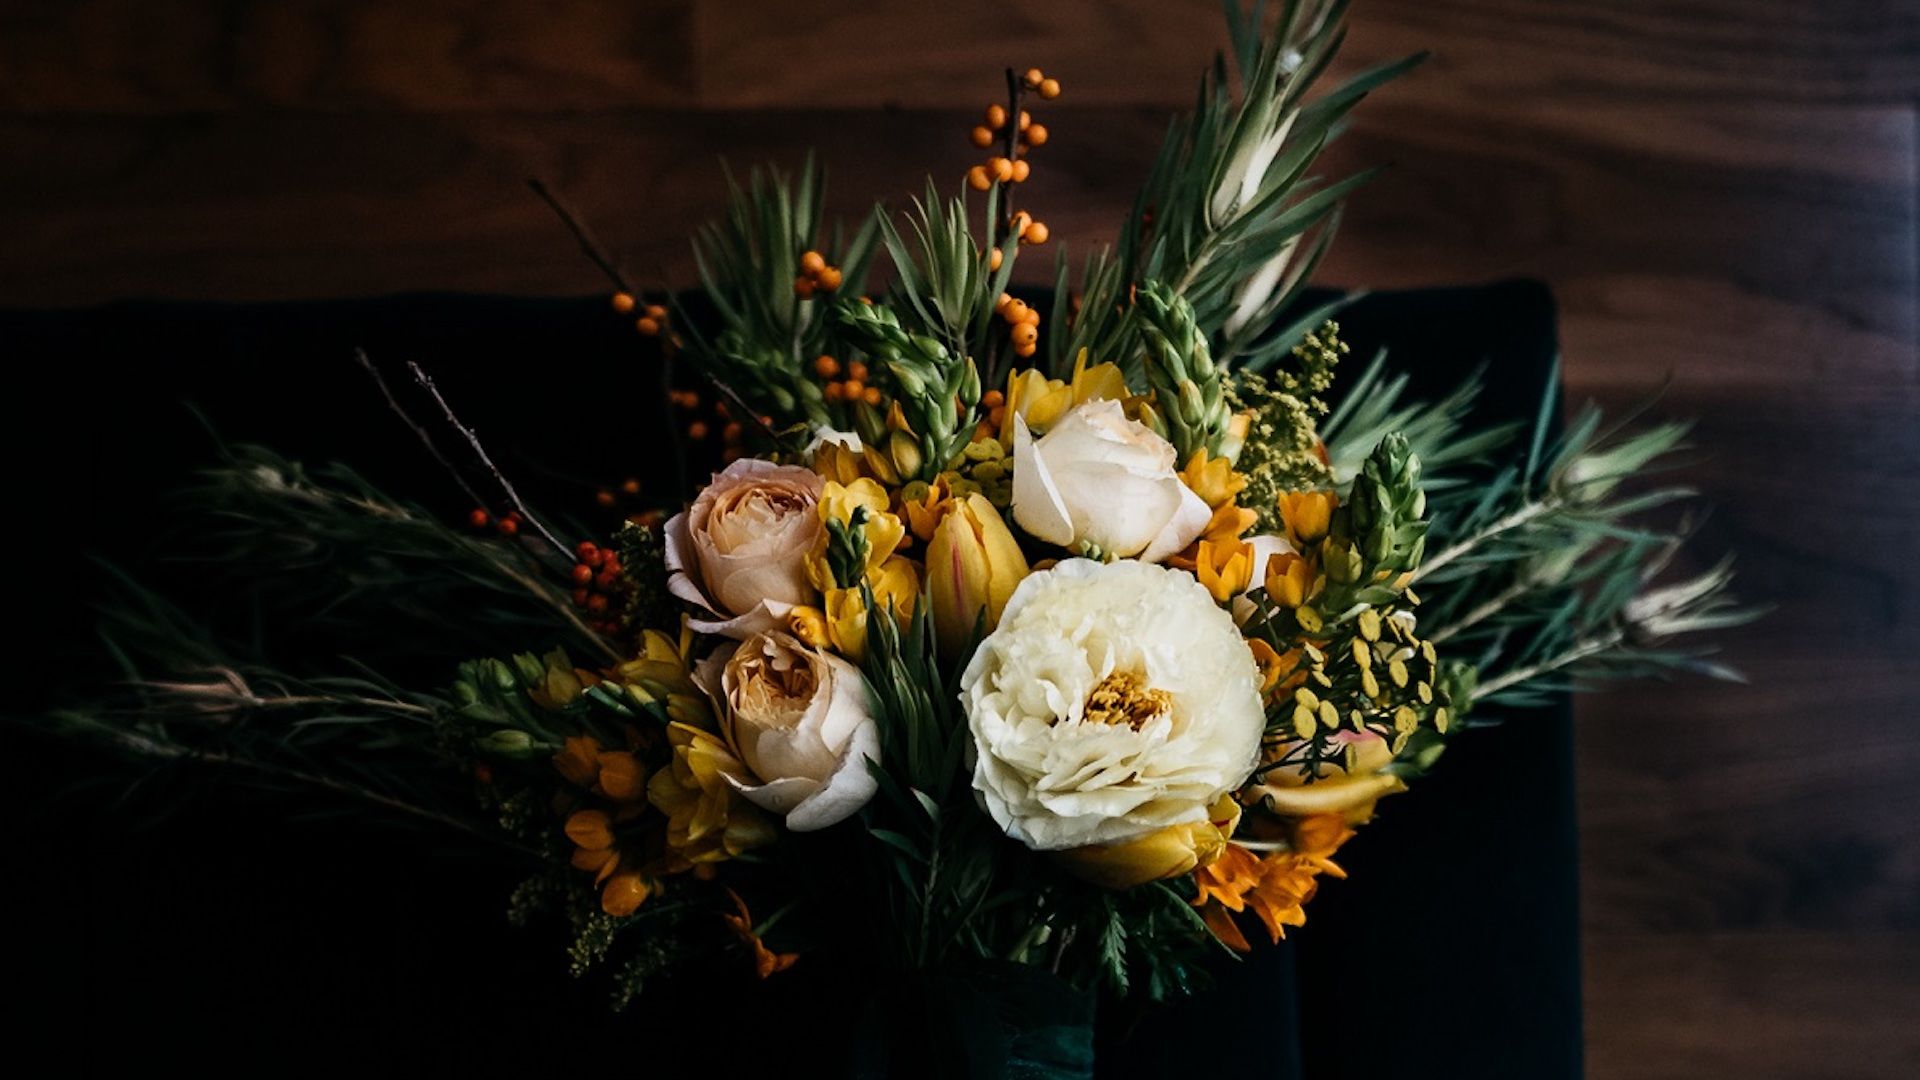 A Bouquet Of Flowers In A Vase On A Table